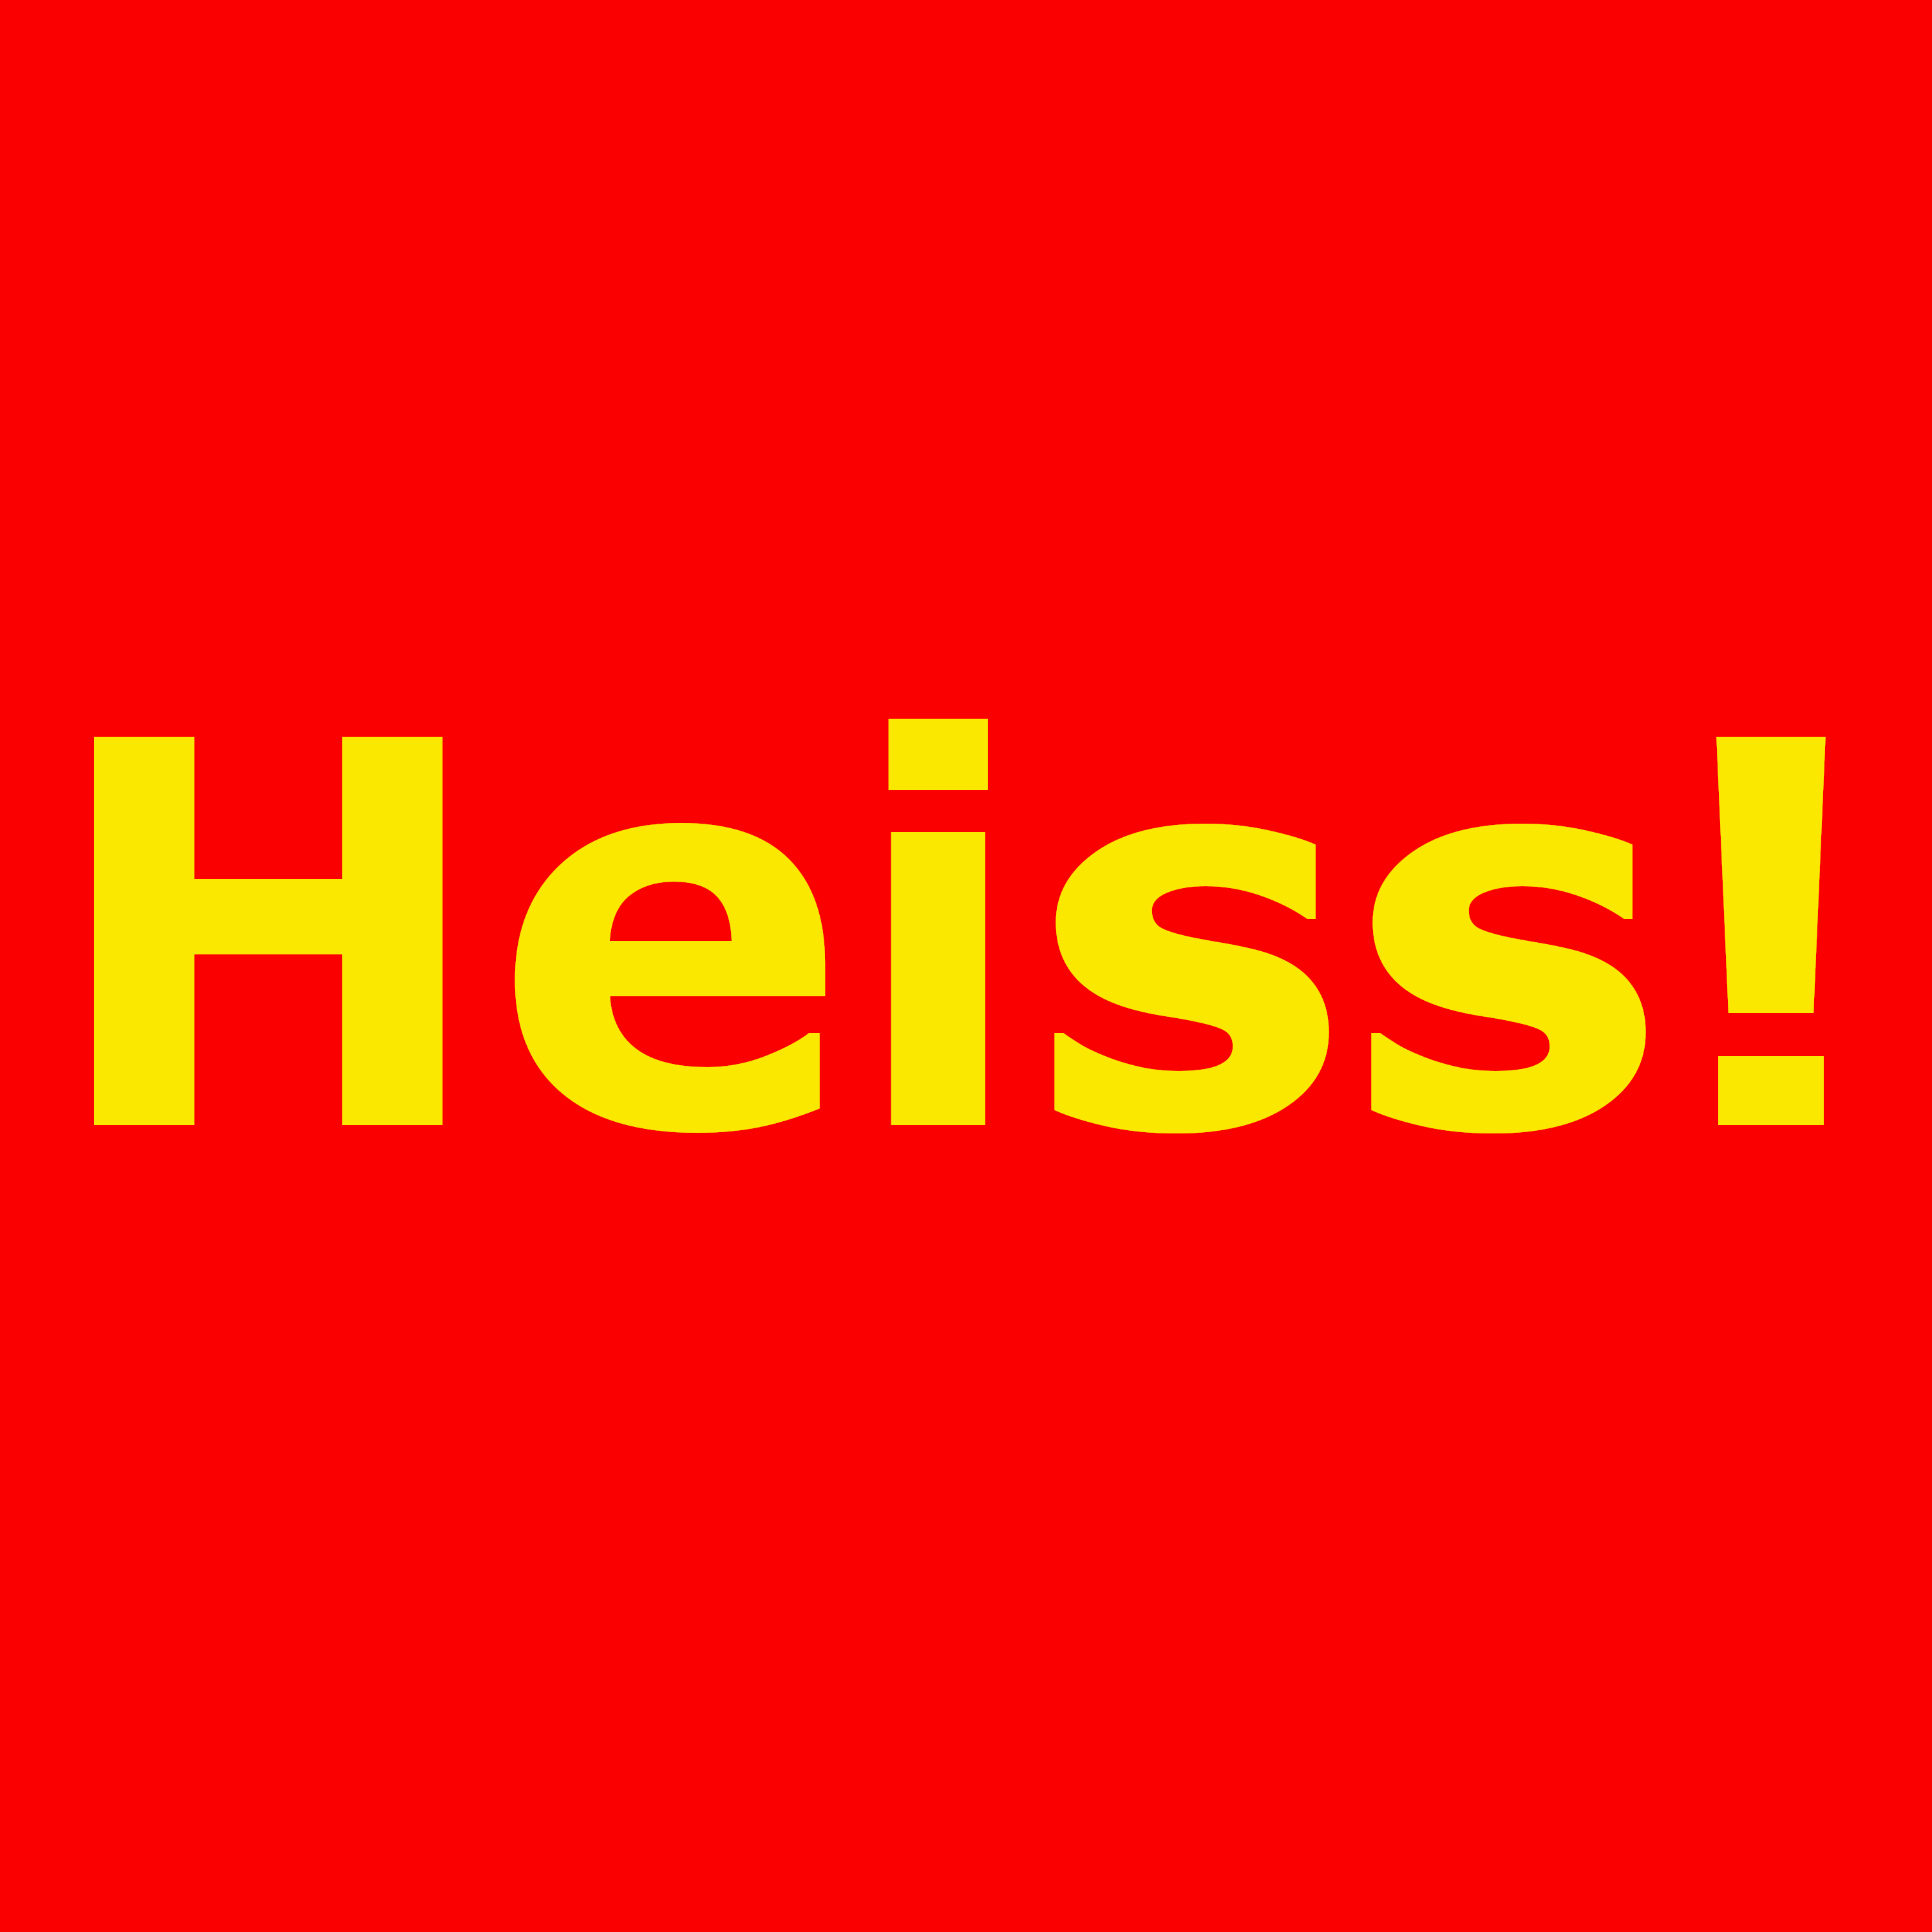 Carsten Schnell’s Latest Single ‘Heiss!’: A Fusion of Retro and Modern Dance Music